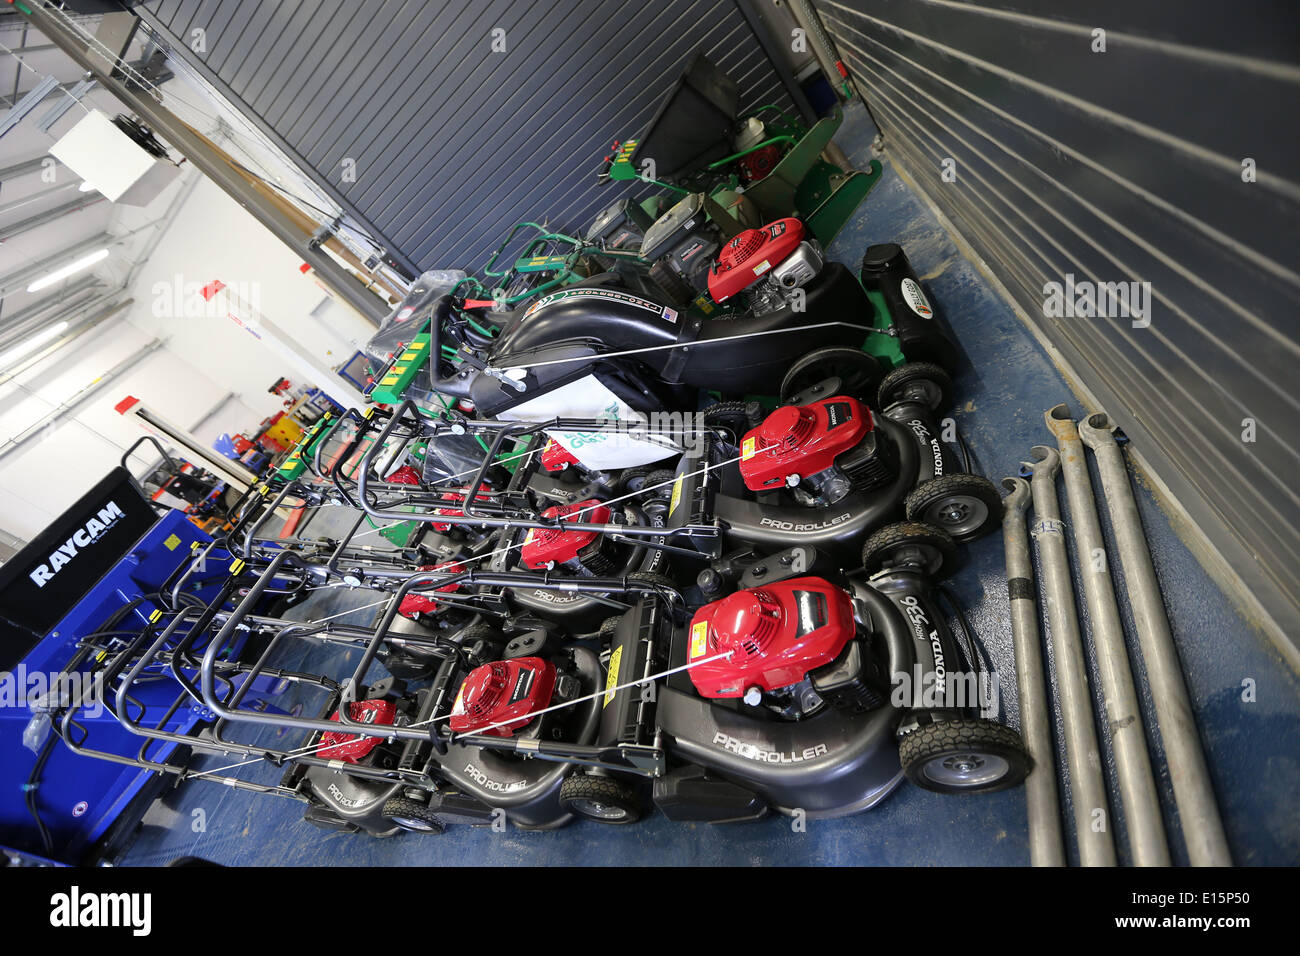 A collection of lawn mowers locked away in a grounds maintenance building Stock Photo